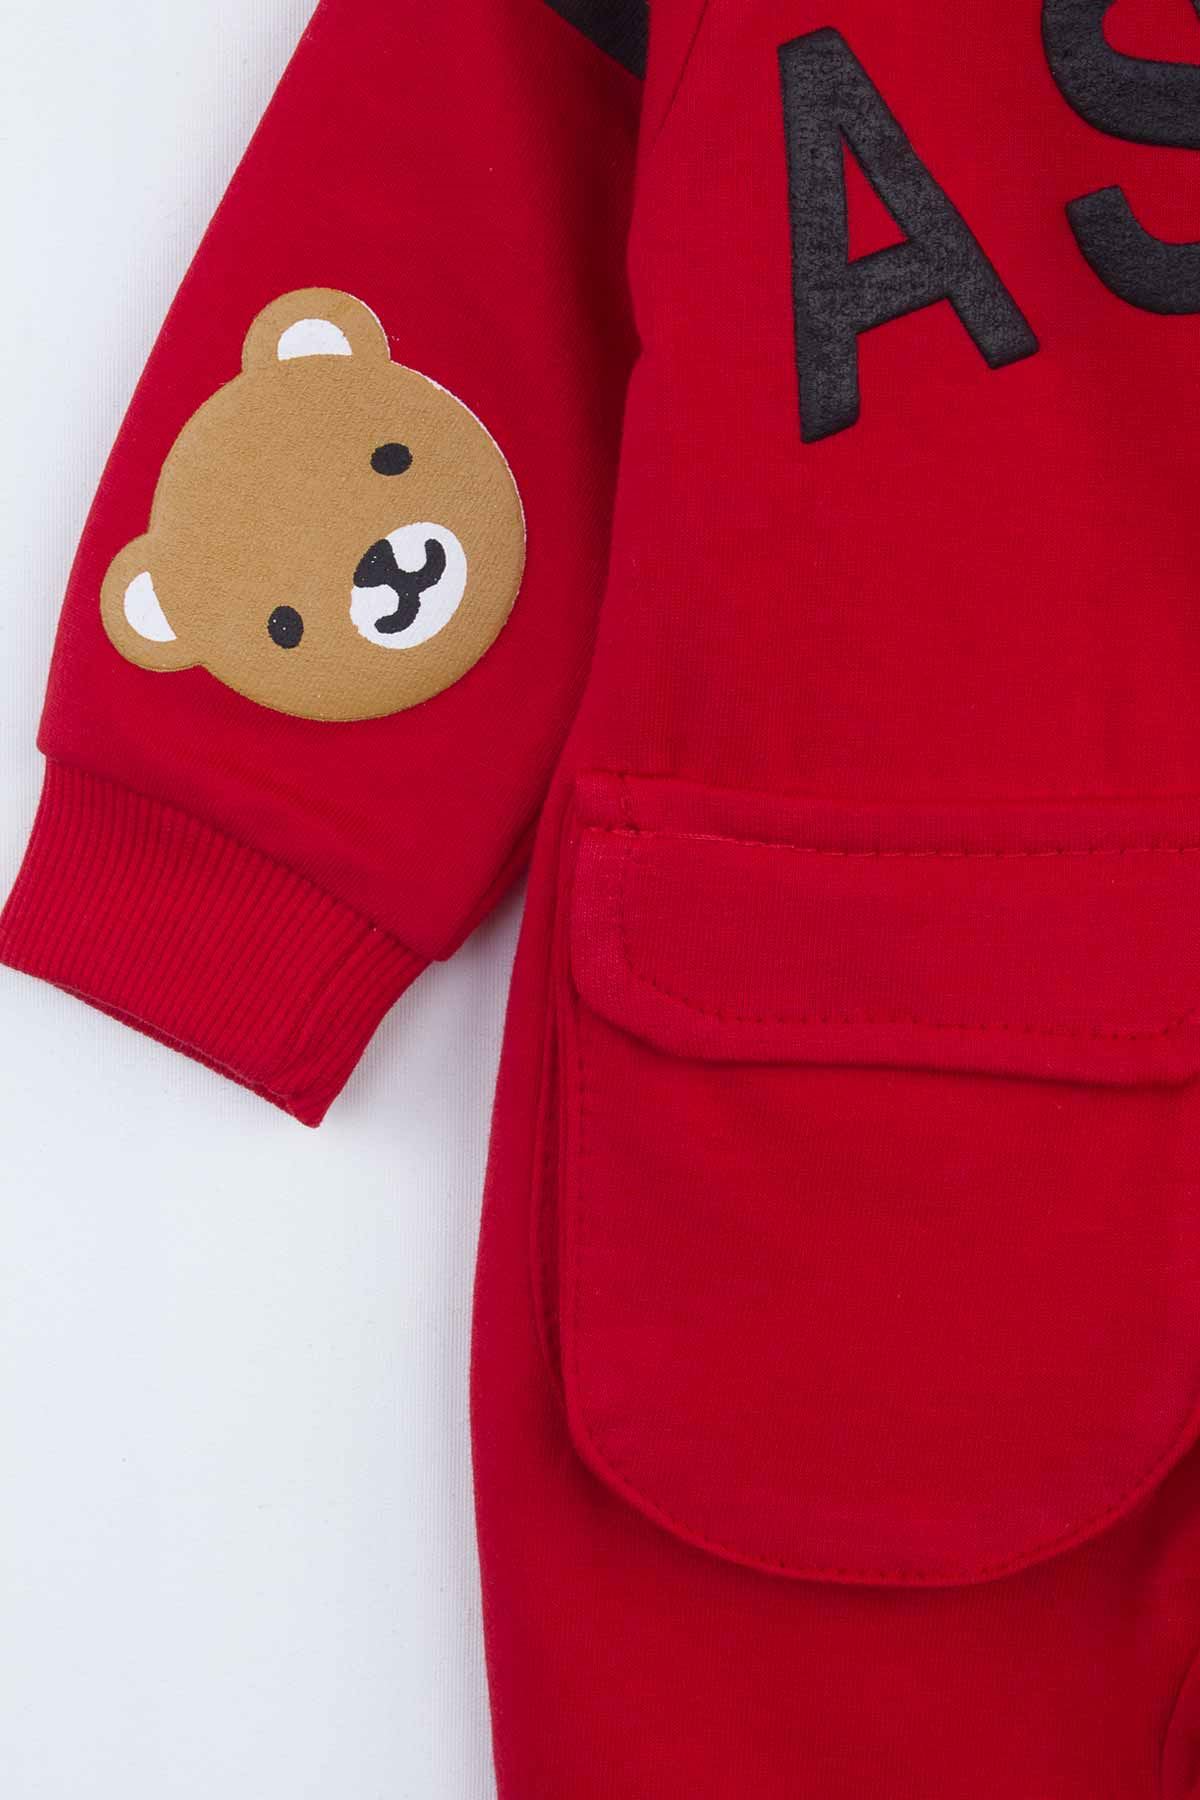 Red Hooded Baby Boy Rompers Fashion 2021 New Season Style Babies Clothes Outfit Cotton Comfortable Underwear for Boys Baby